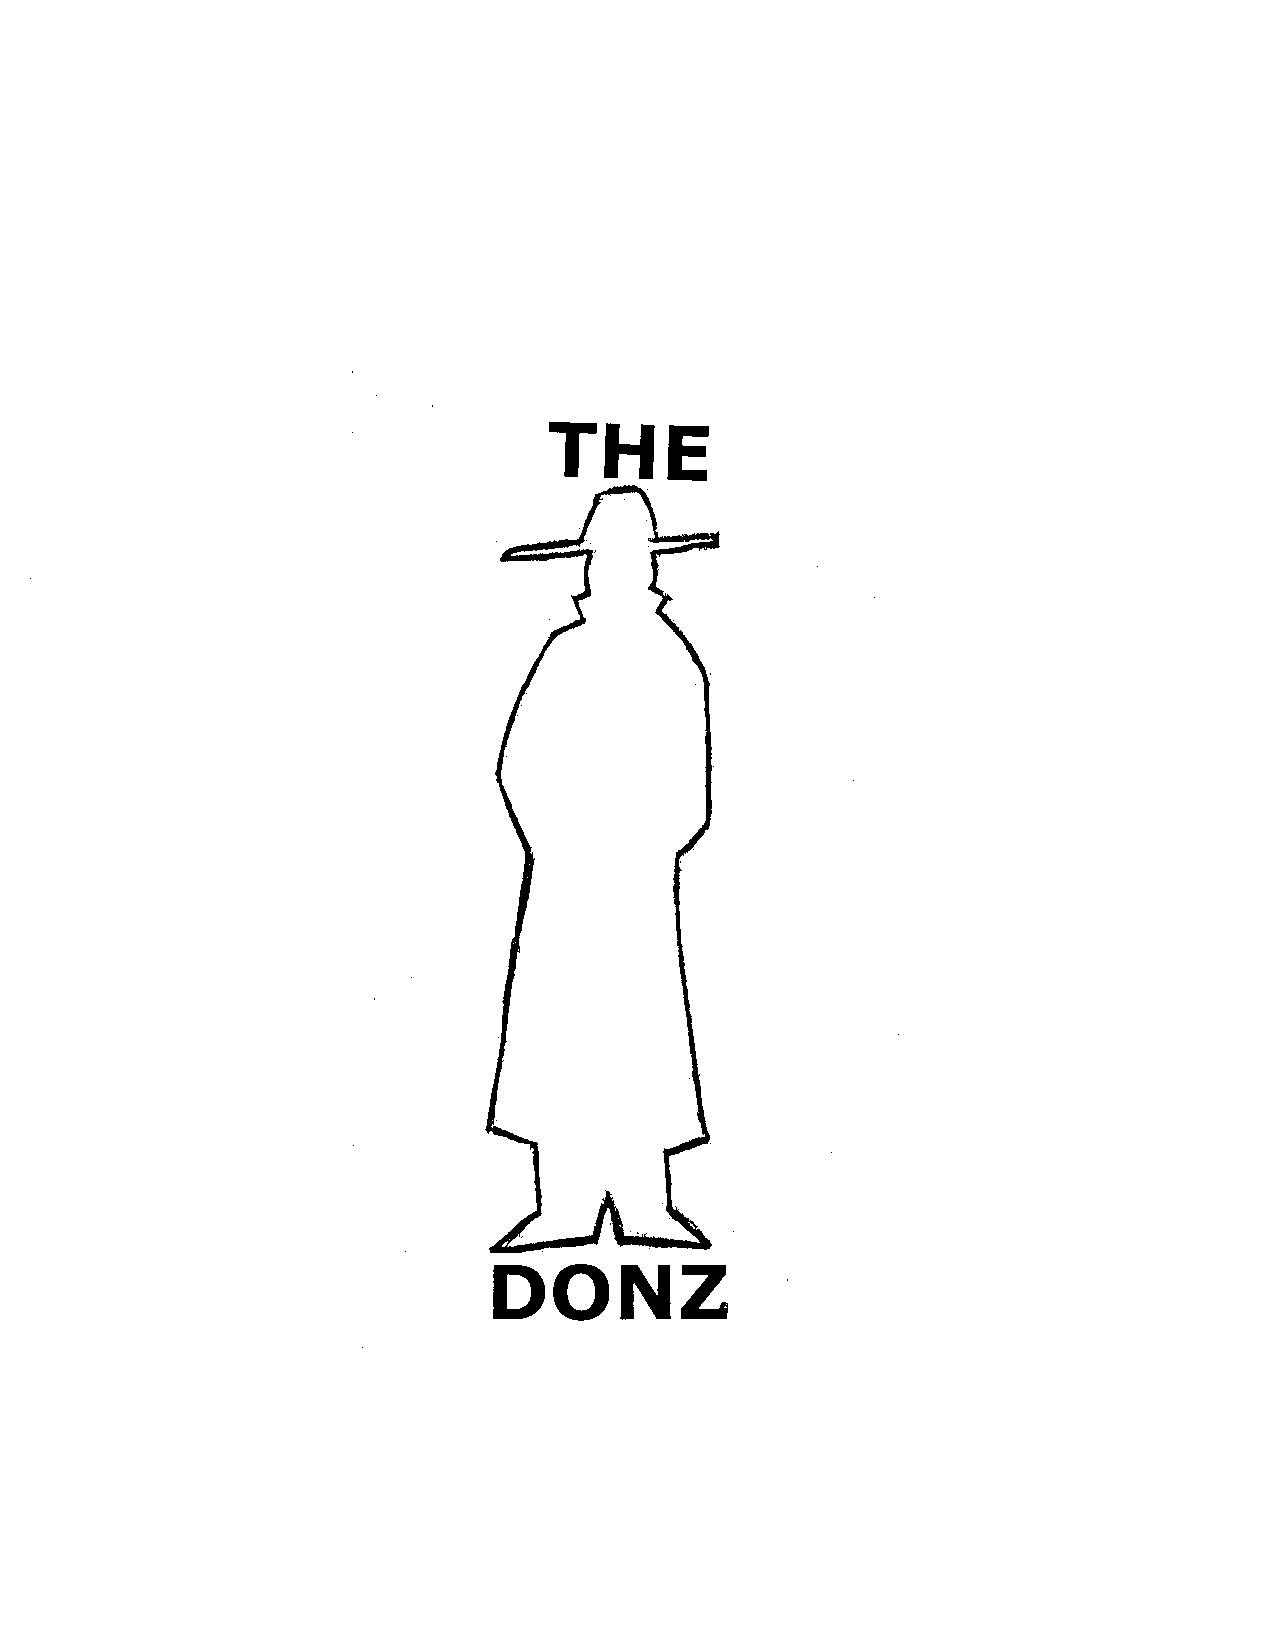  THE DONZ